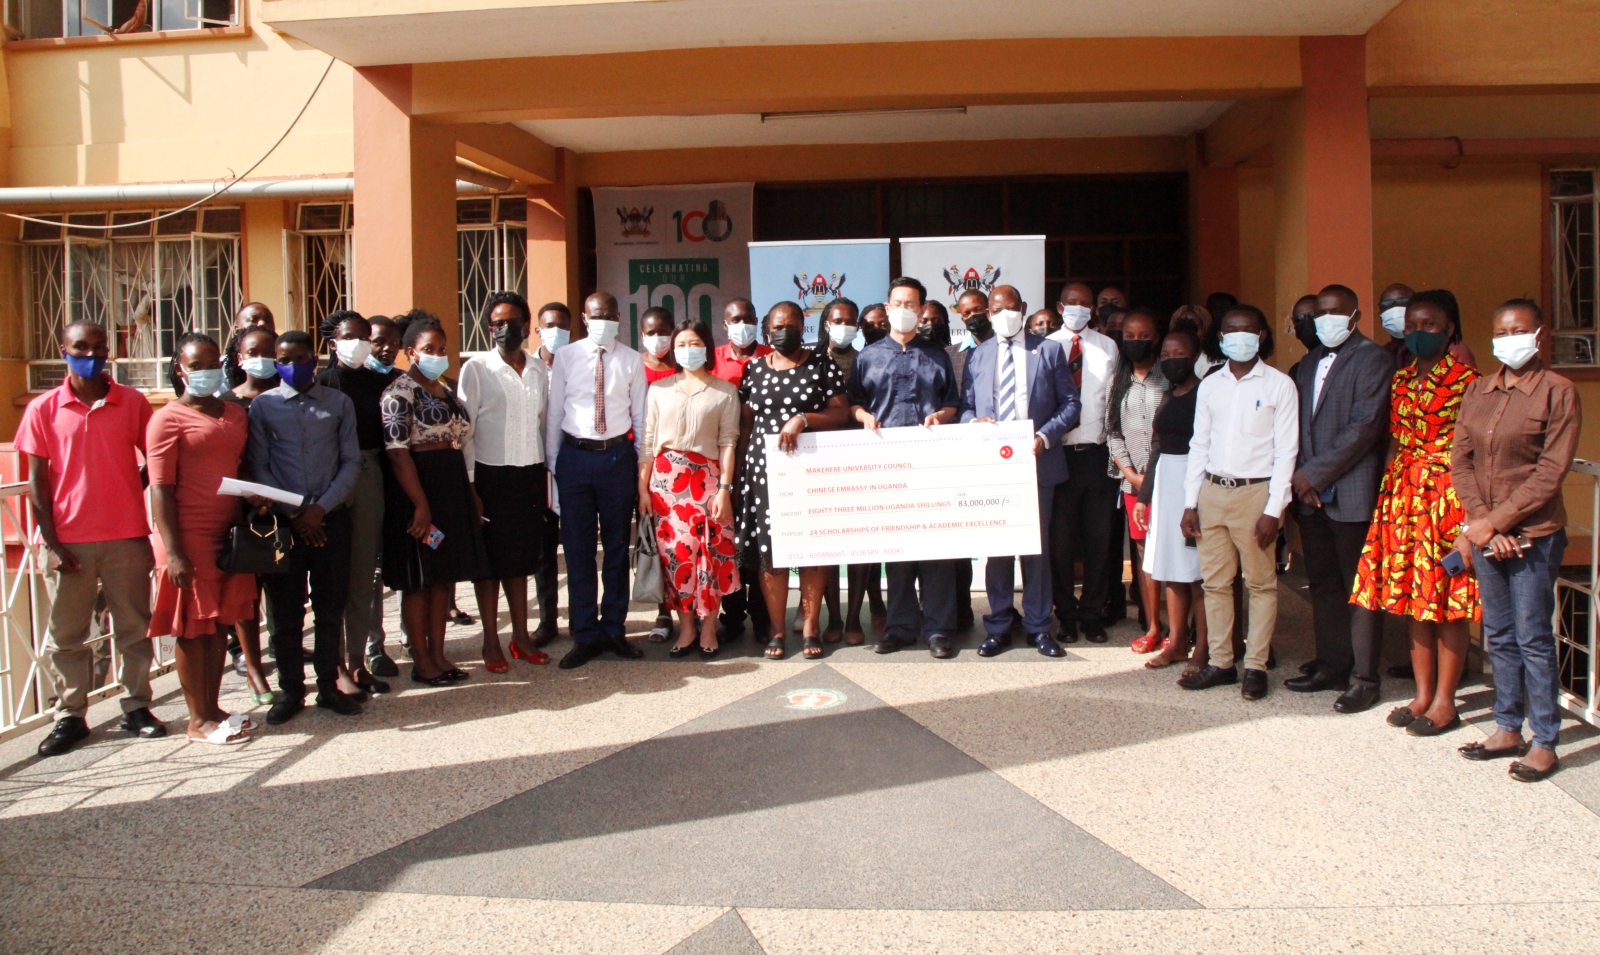 L-R: (Holding the dummy cheque) Dr. Euzobia Baine Mugisha-Director Gender Mainstreaming Directorate, H.E. Zhang Lizhong-Ambassador of People's Republic of China to Uganda and the Vice Chancellor Prof. Barnabas Nawangwe in a group photo with the scholars and some members of staff on 26th July 2022 at Senate Building, Makerere University.